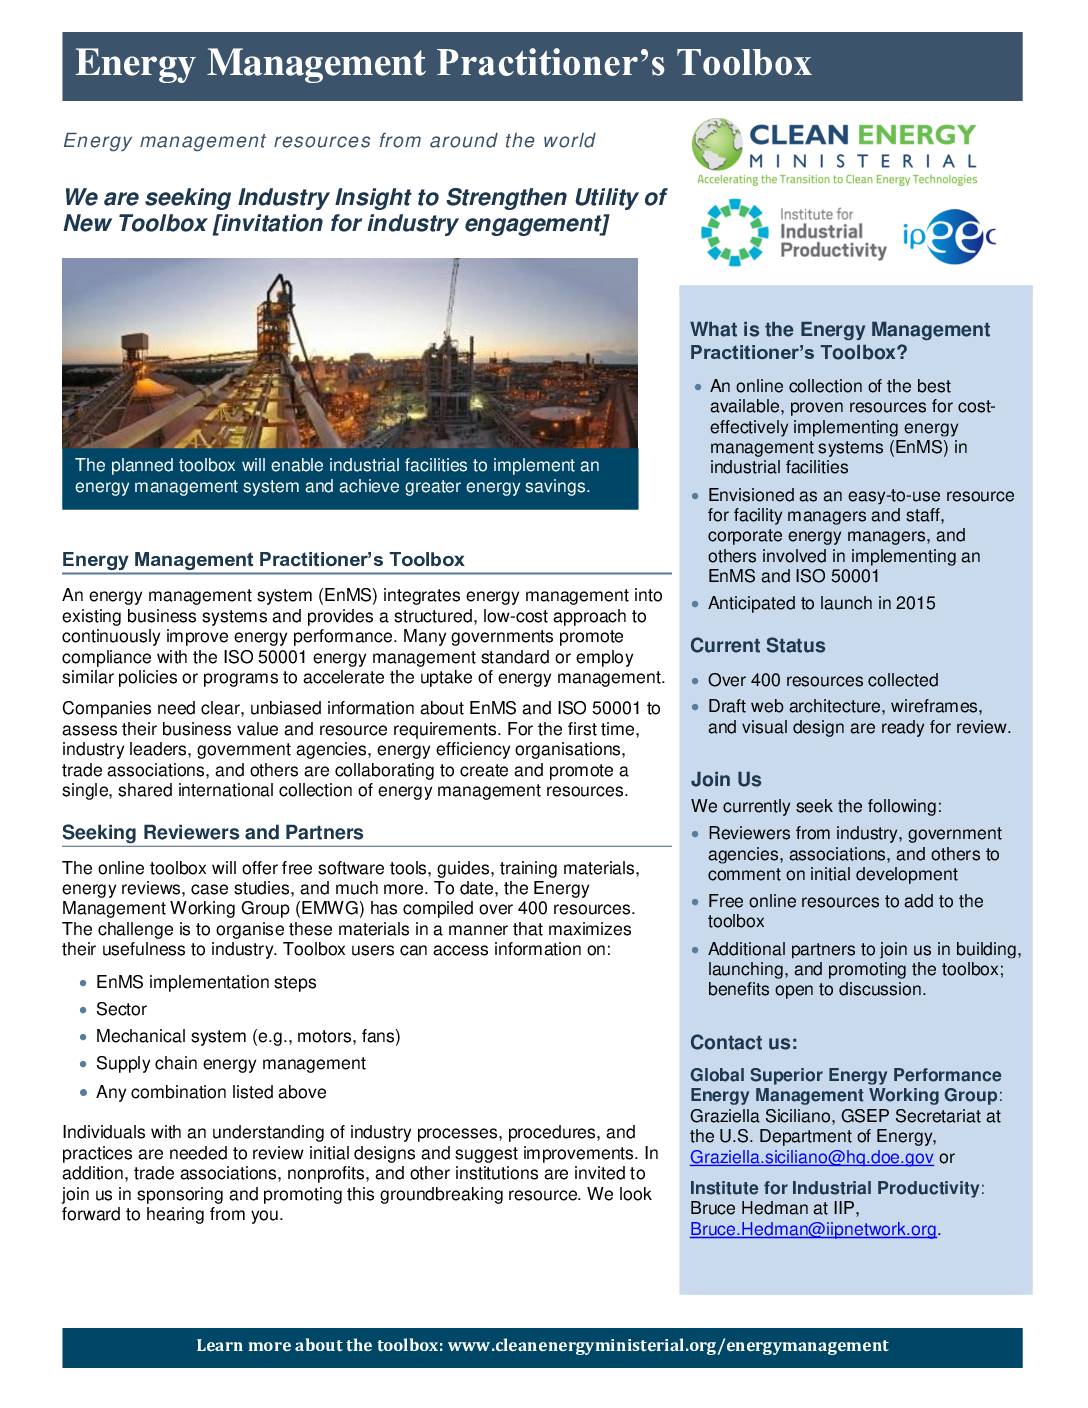 Energy Management Practitioner’s Toolbox – Invitation for Industry Engagement